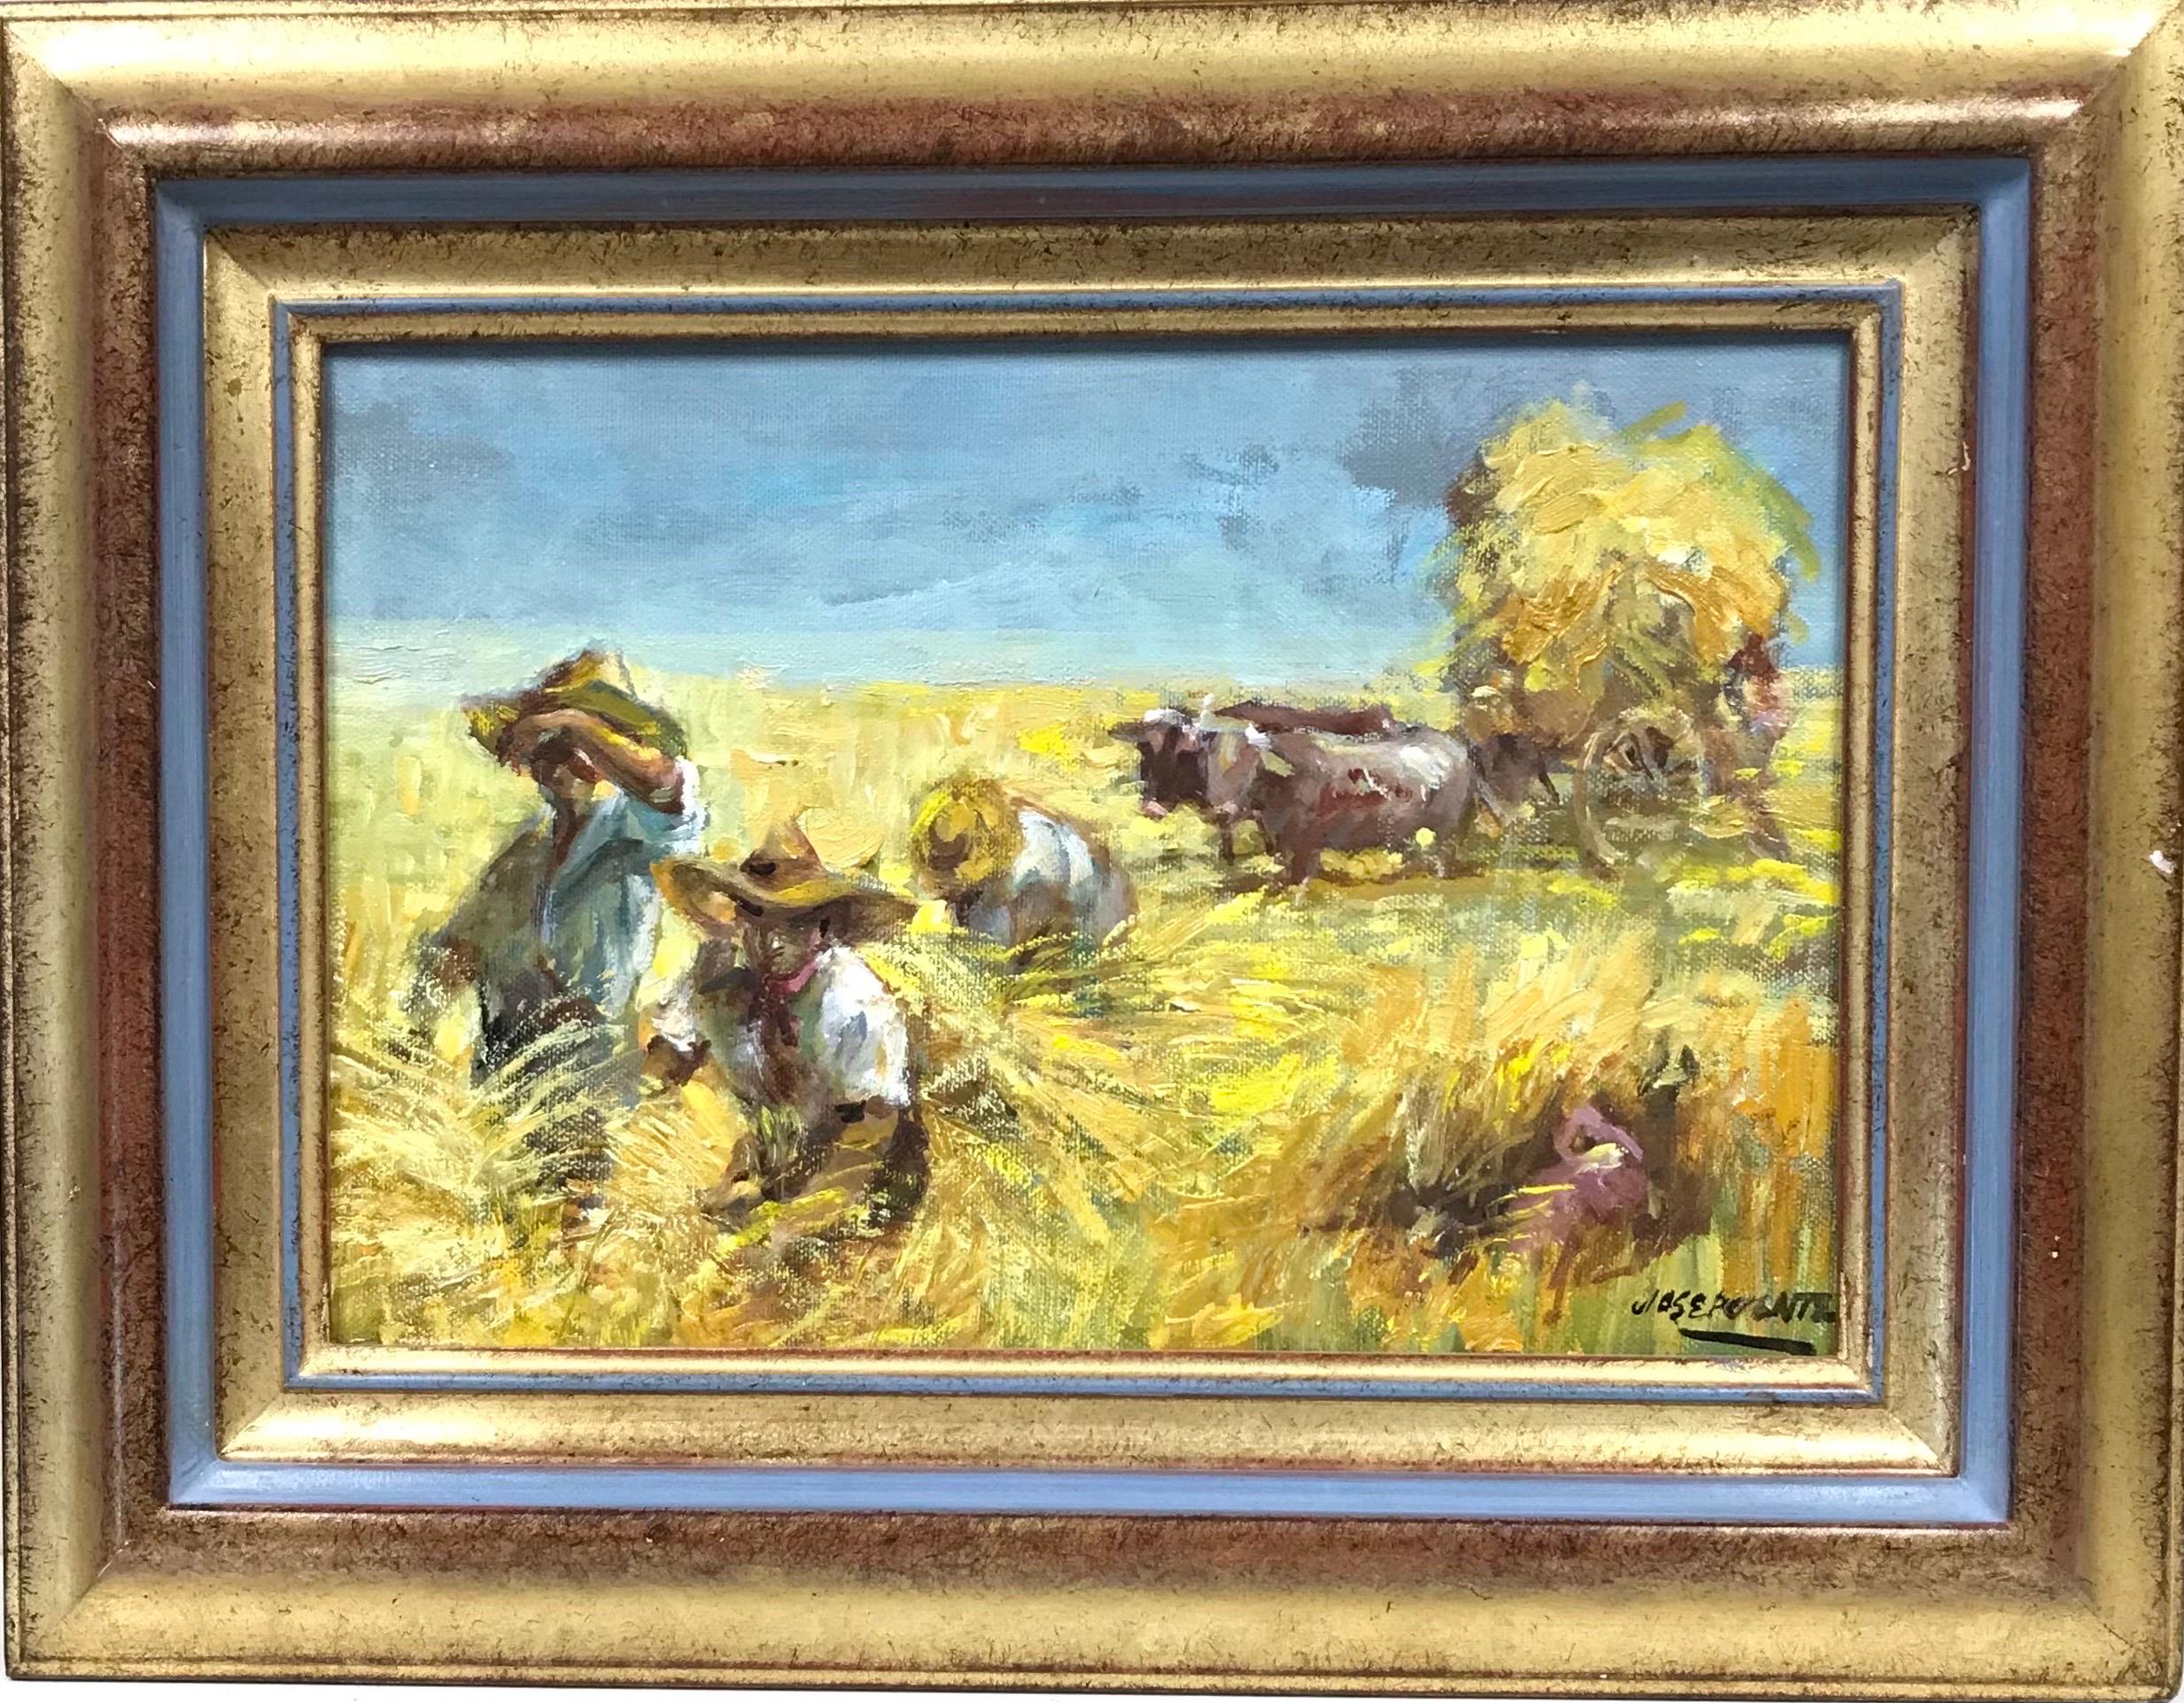 Sun Scorched Harvest Fields with Workers and Oxon pulling Cart, Signed oil - Painting by Spanish Impressionist